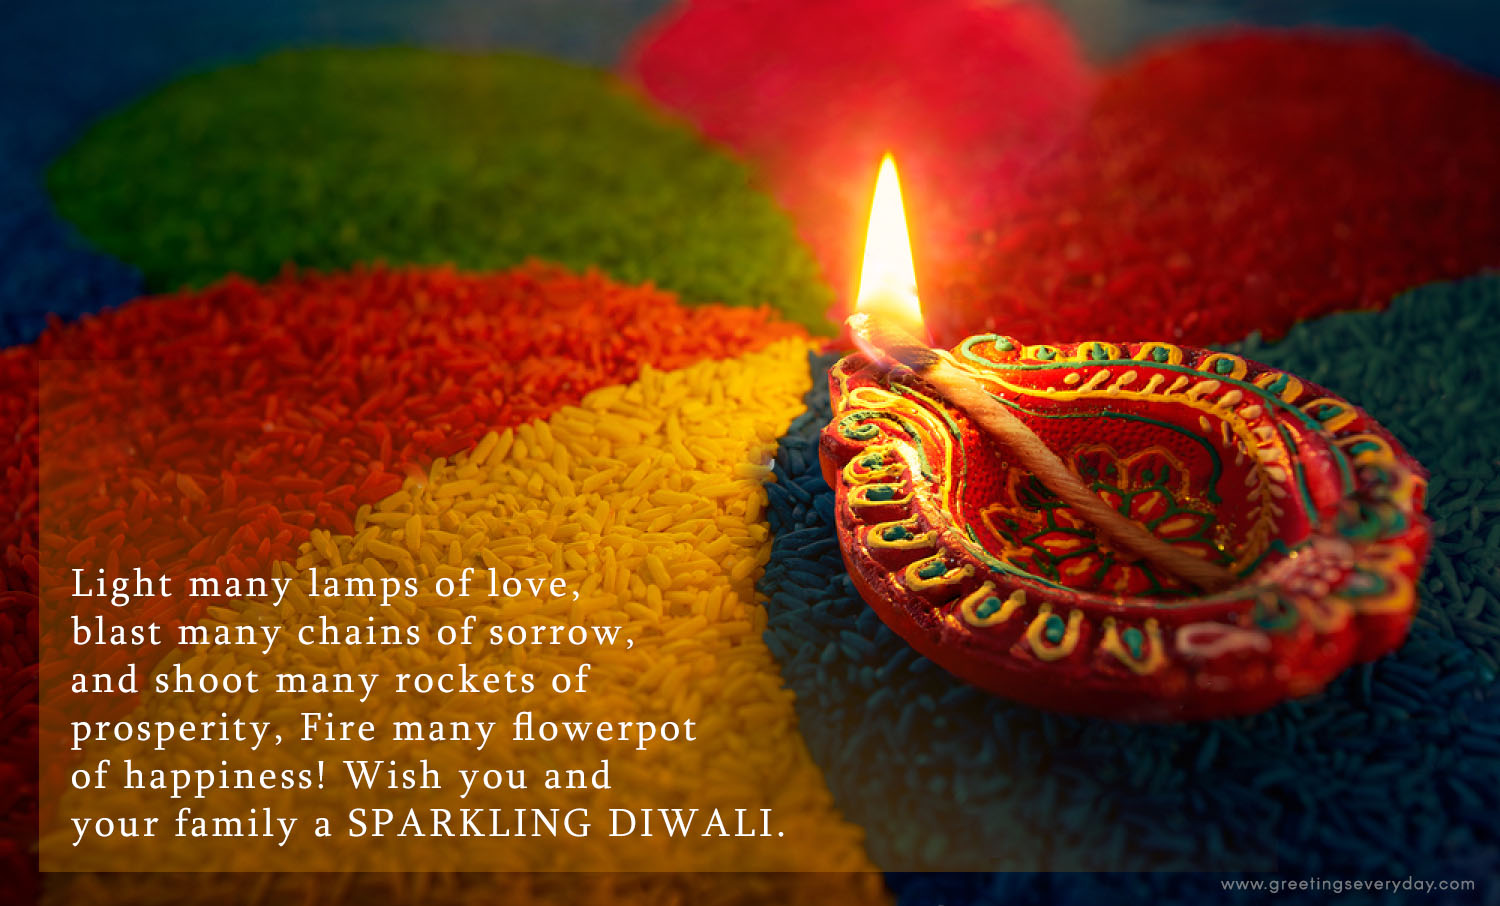 wish you and your family and sparkling diwali